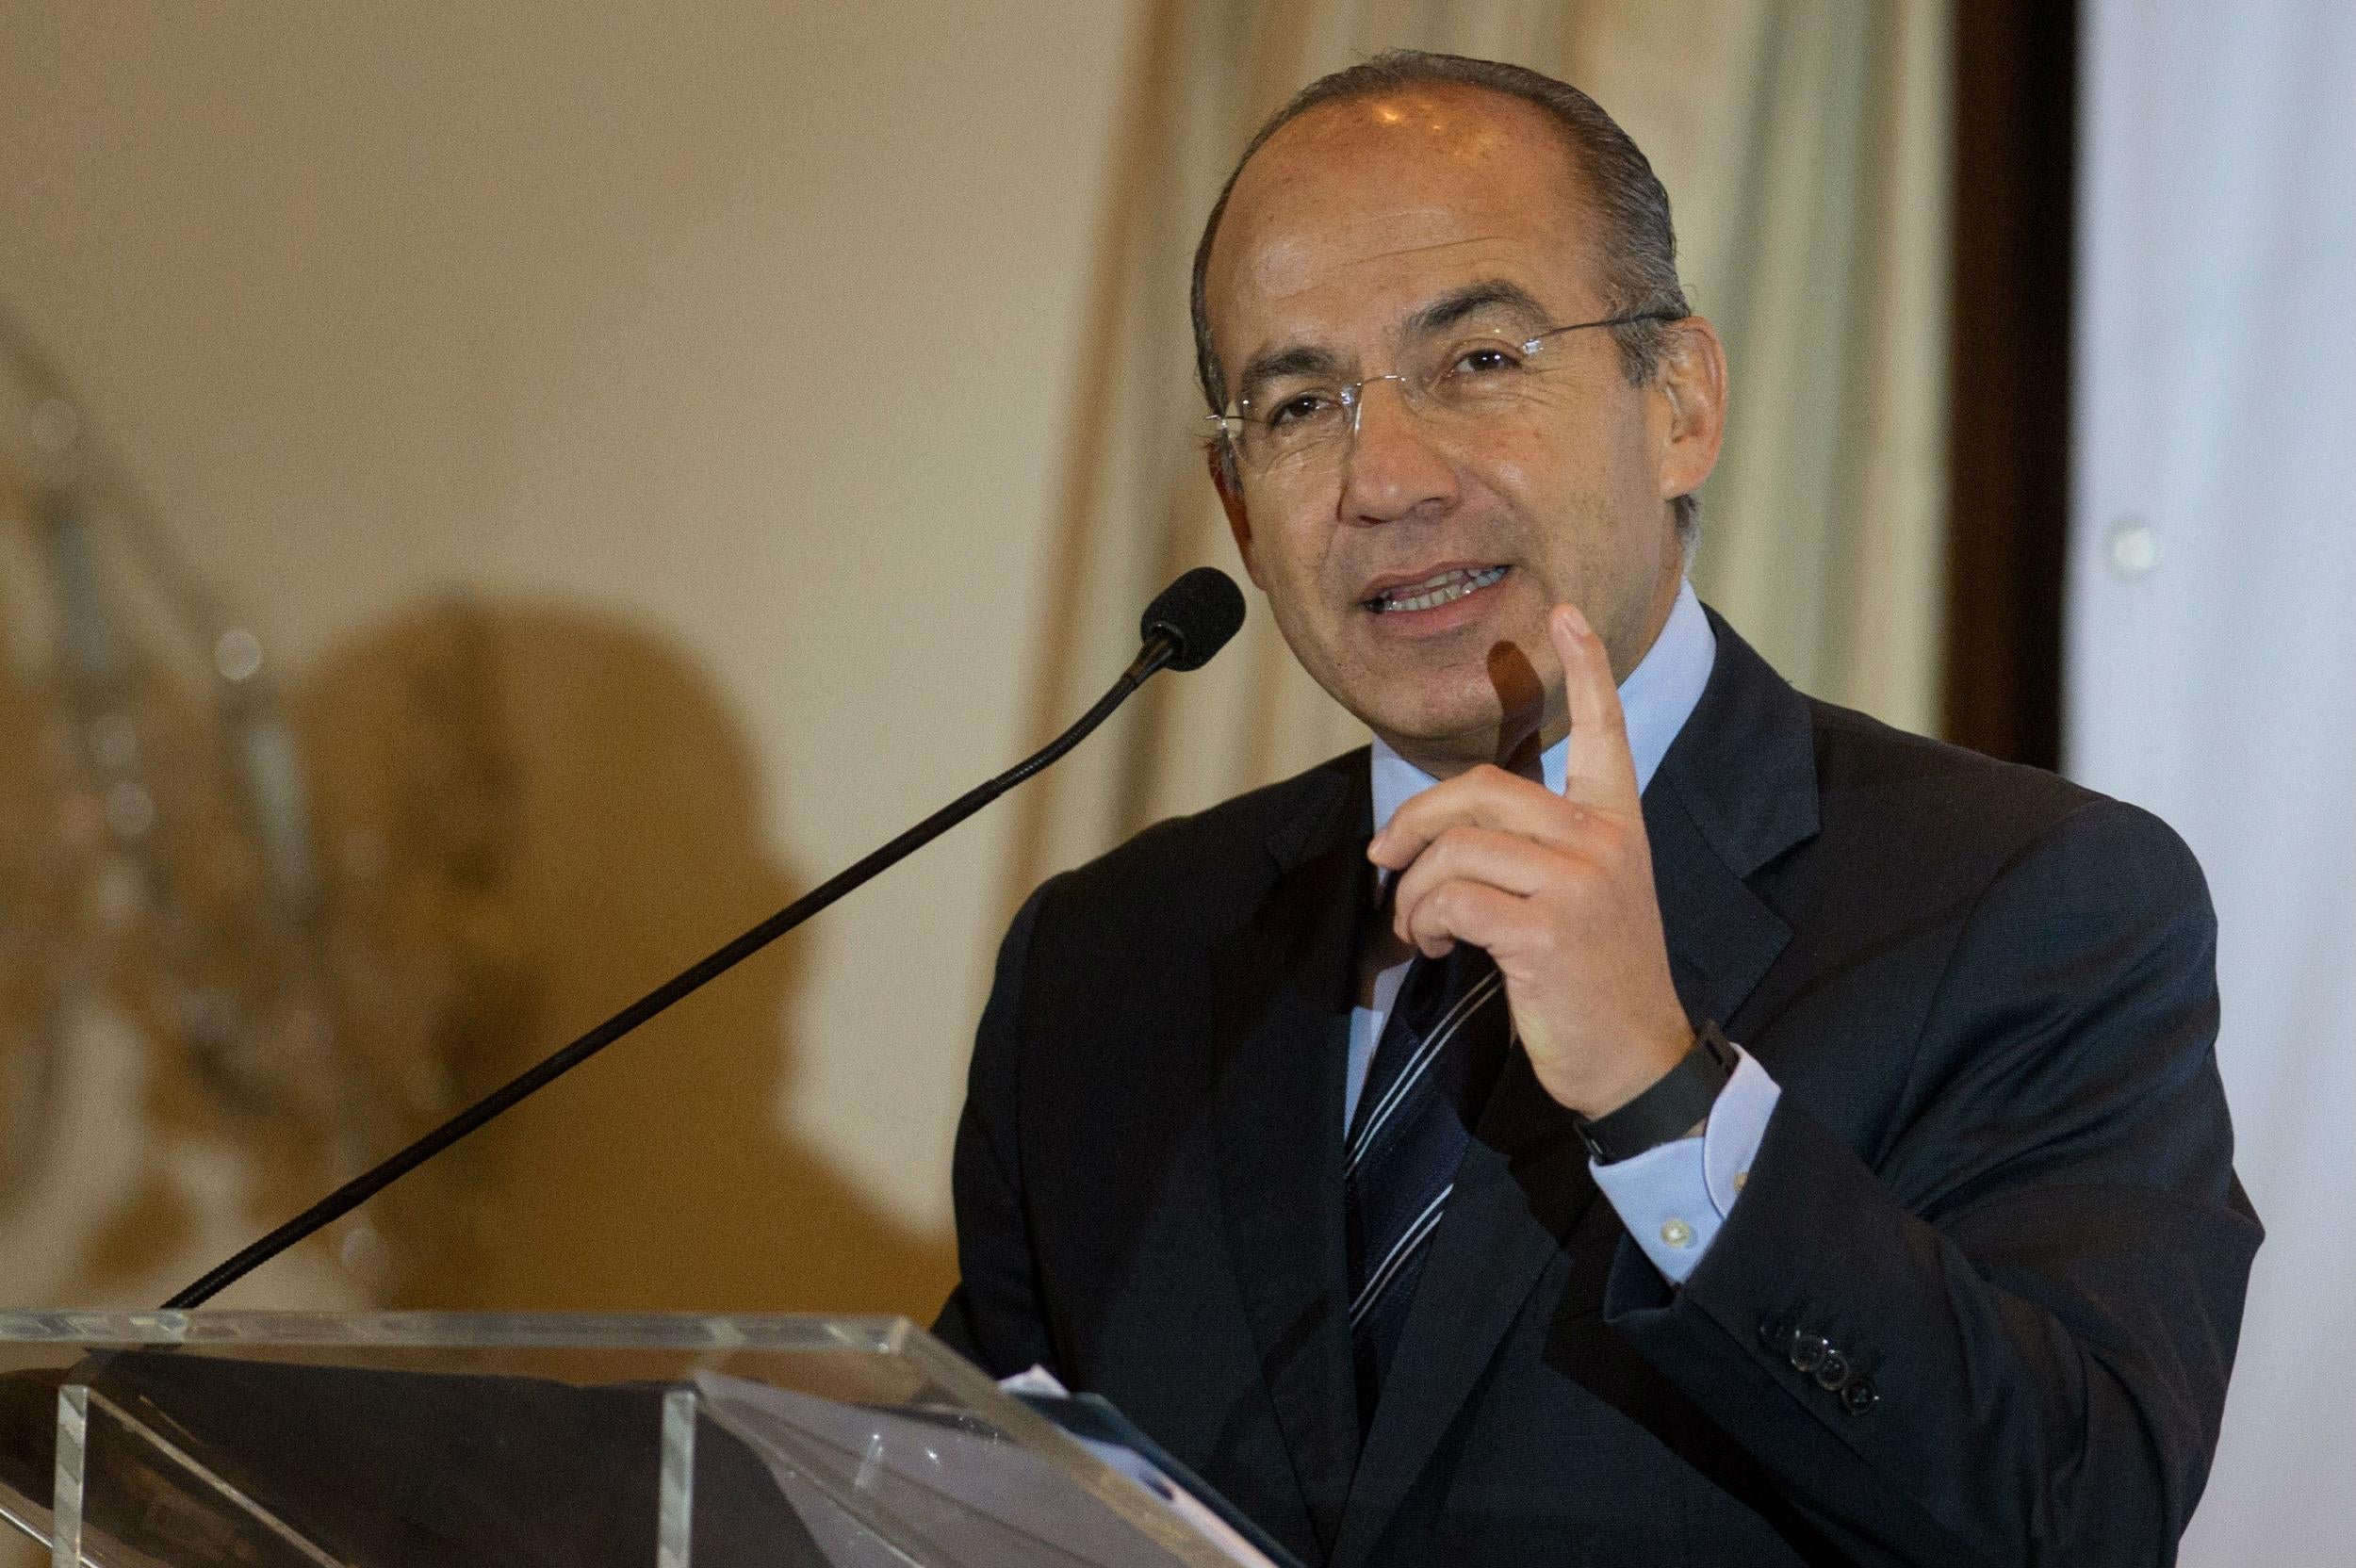 Felipe Calderon said the 'first loser' of building a wall would be the US